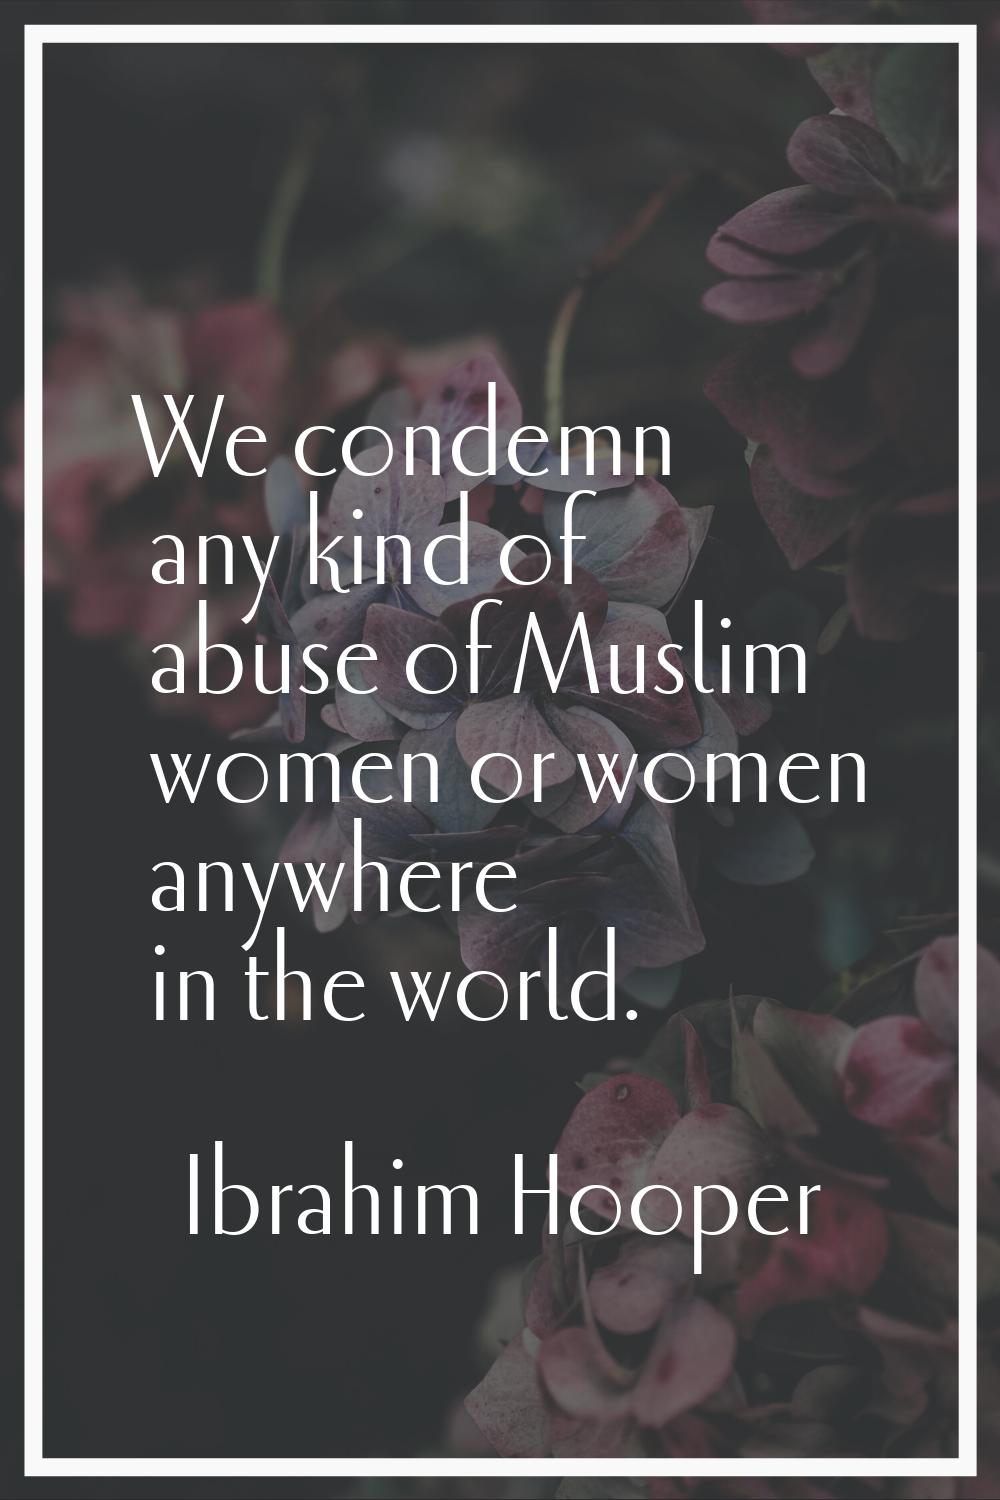 We condemn any kind of abuse of Muslim women or women anywhere in the world.